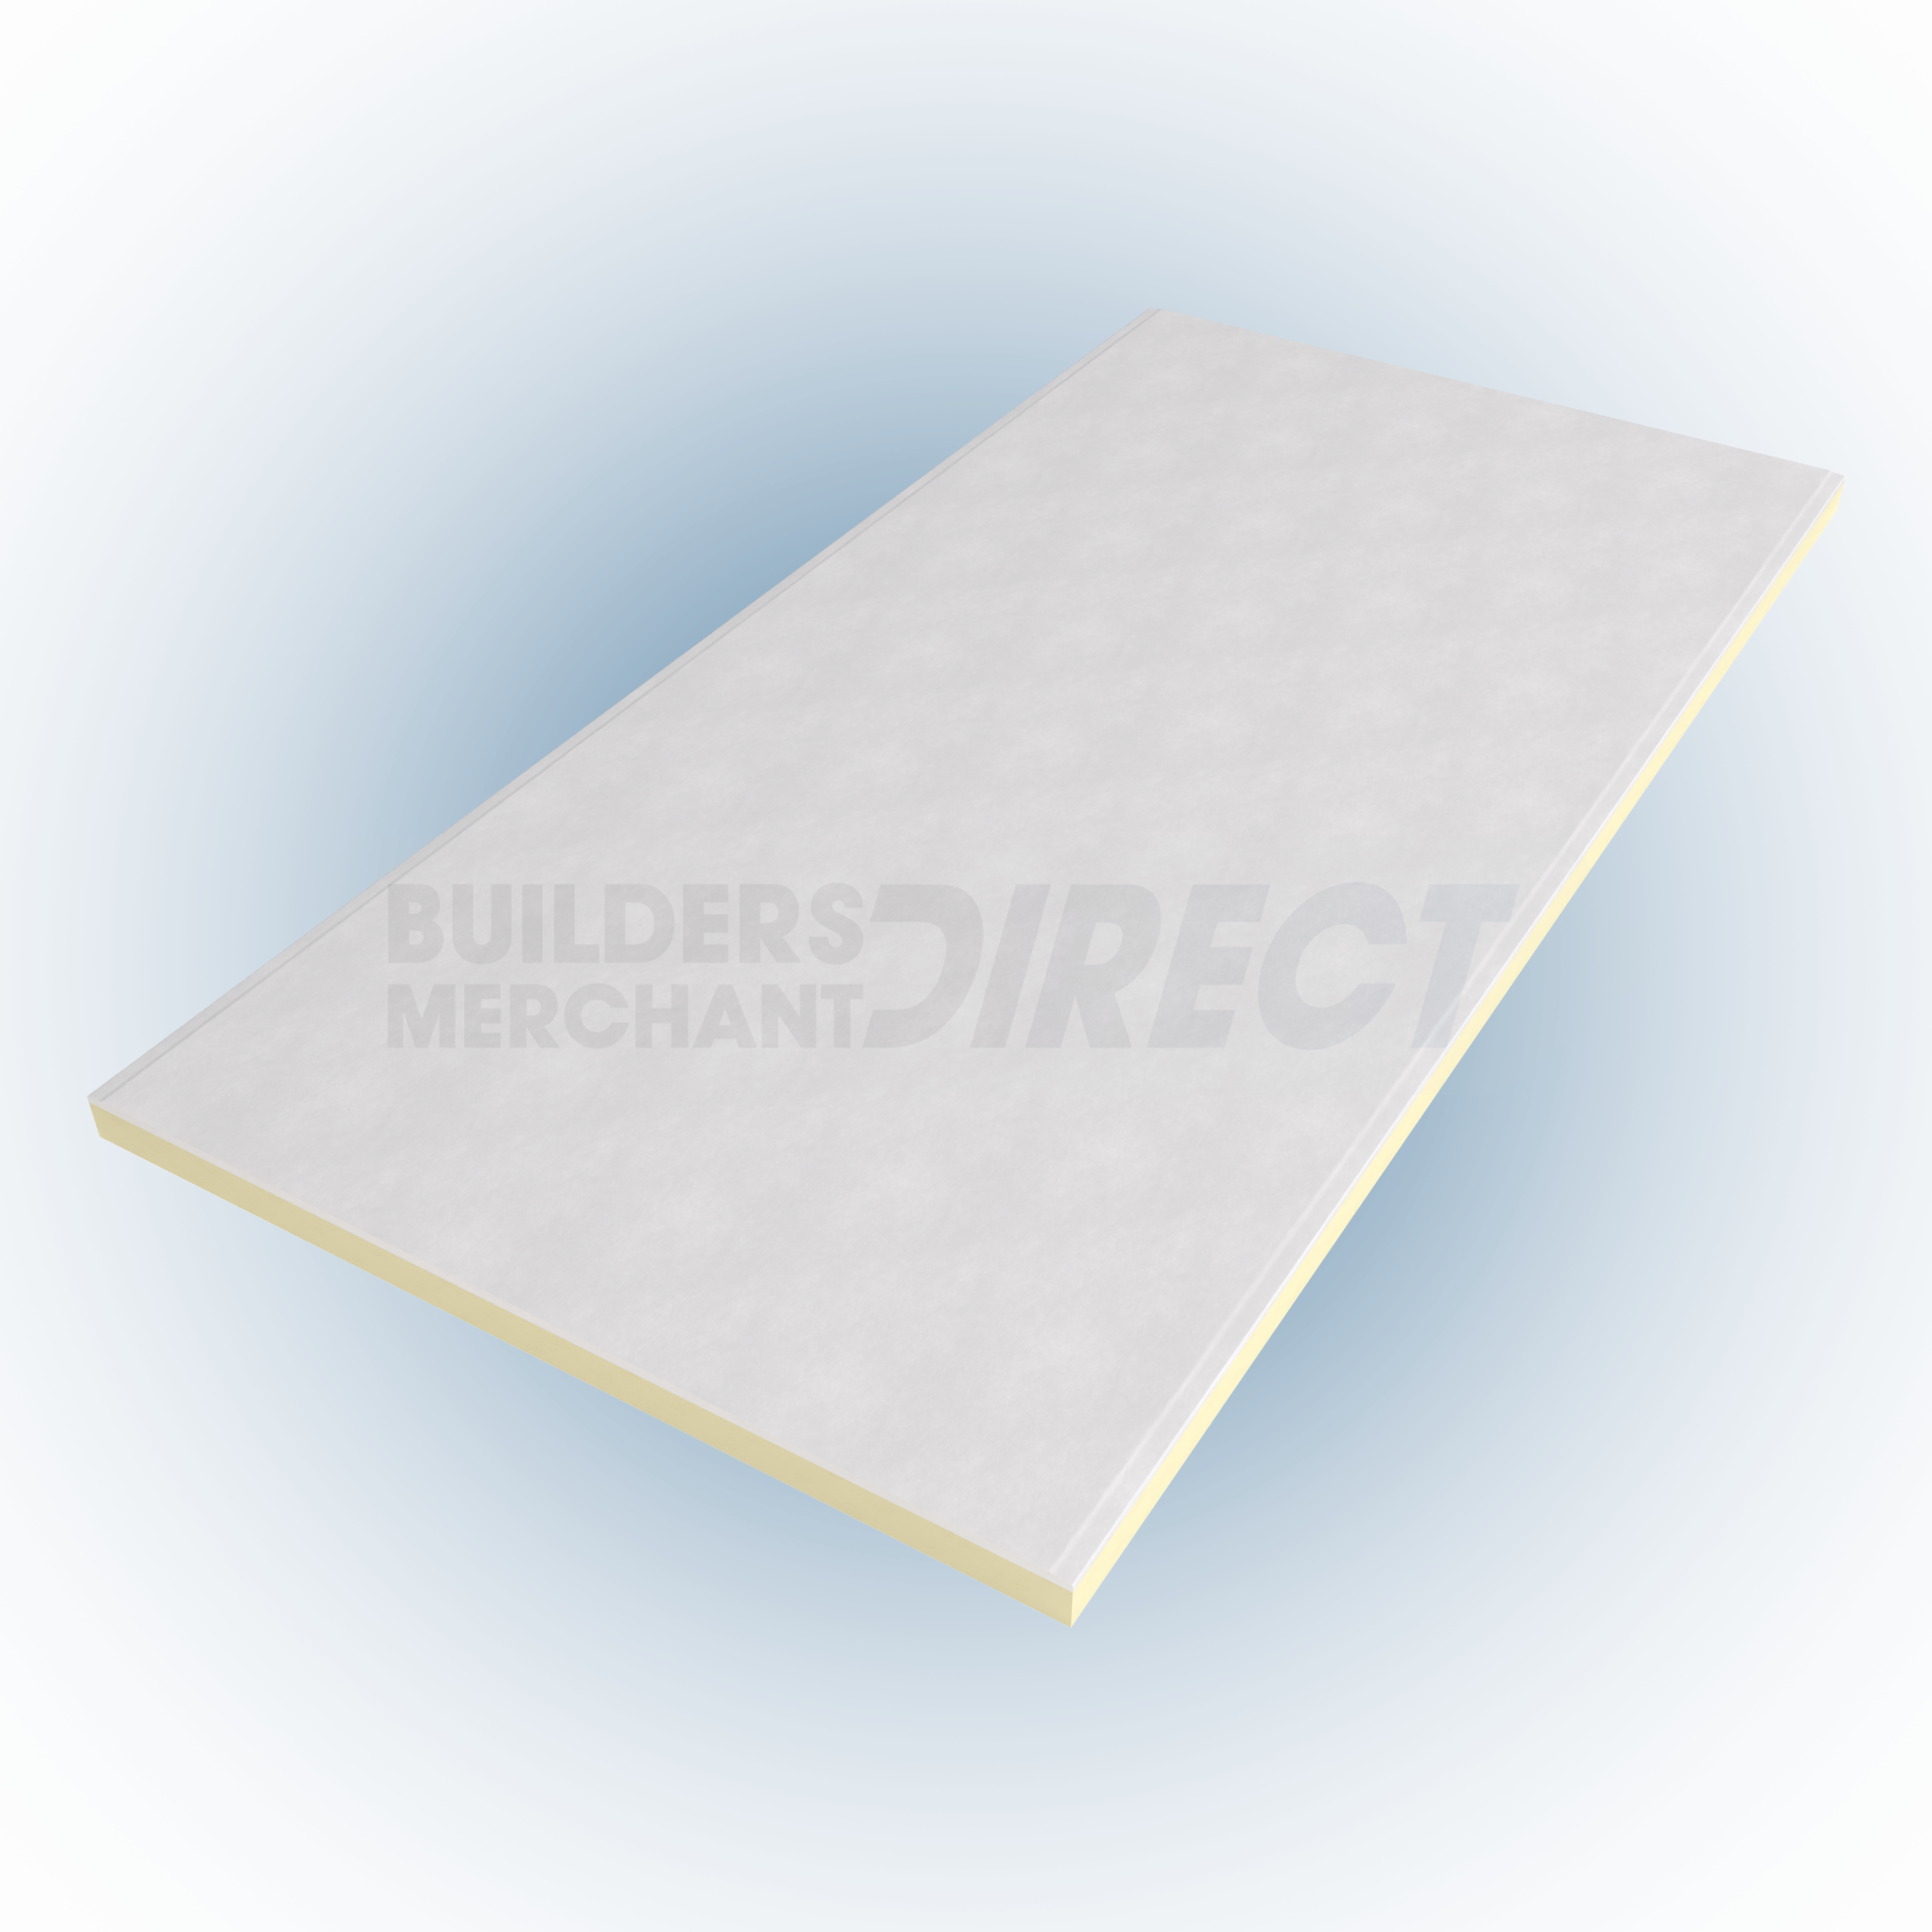 Tekwarm Insulation Tekwarm PIR Pitched Roof Insulation Handy Board 1200 x 600mm (Pack of 4)